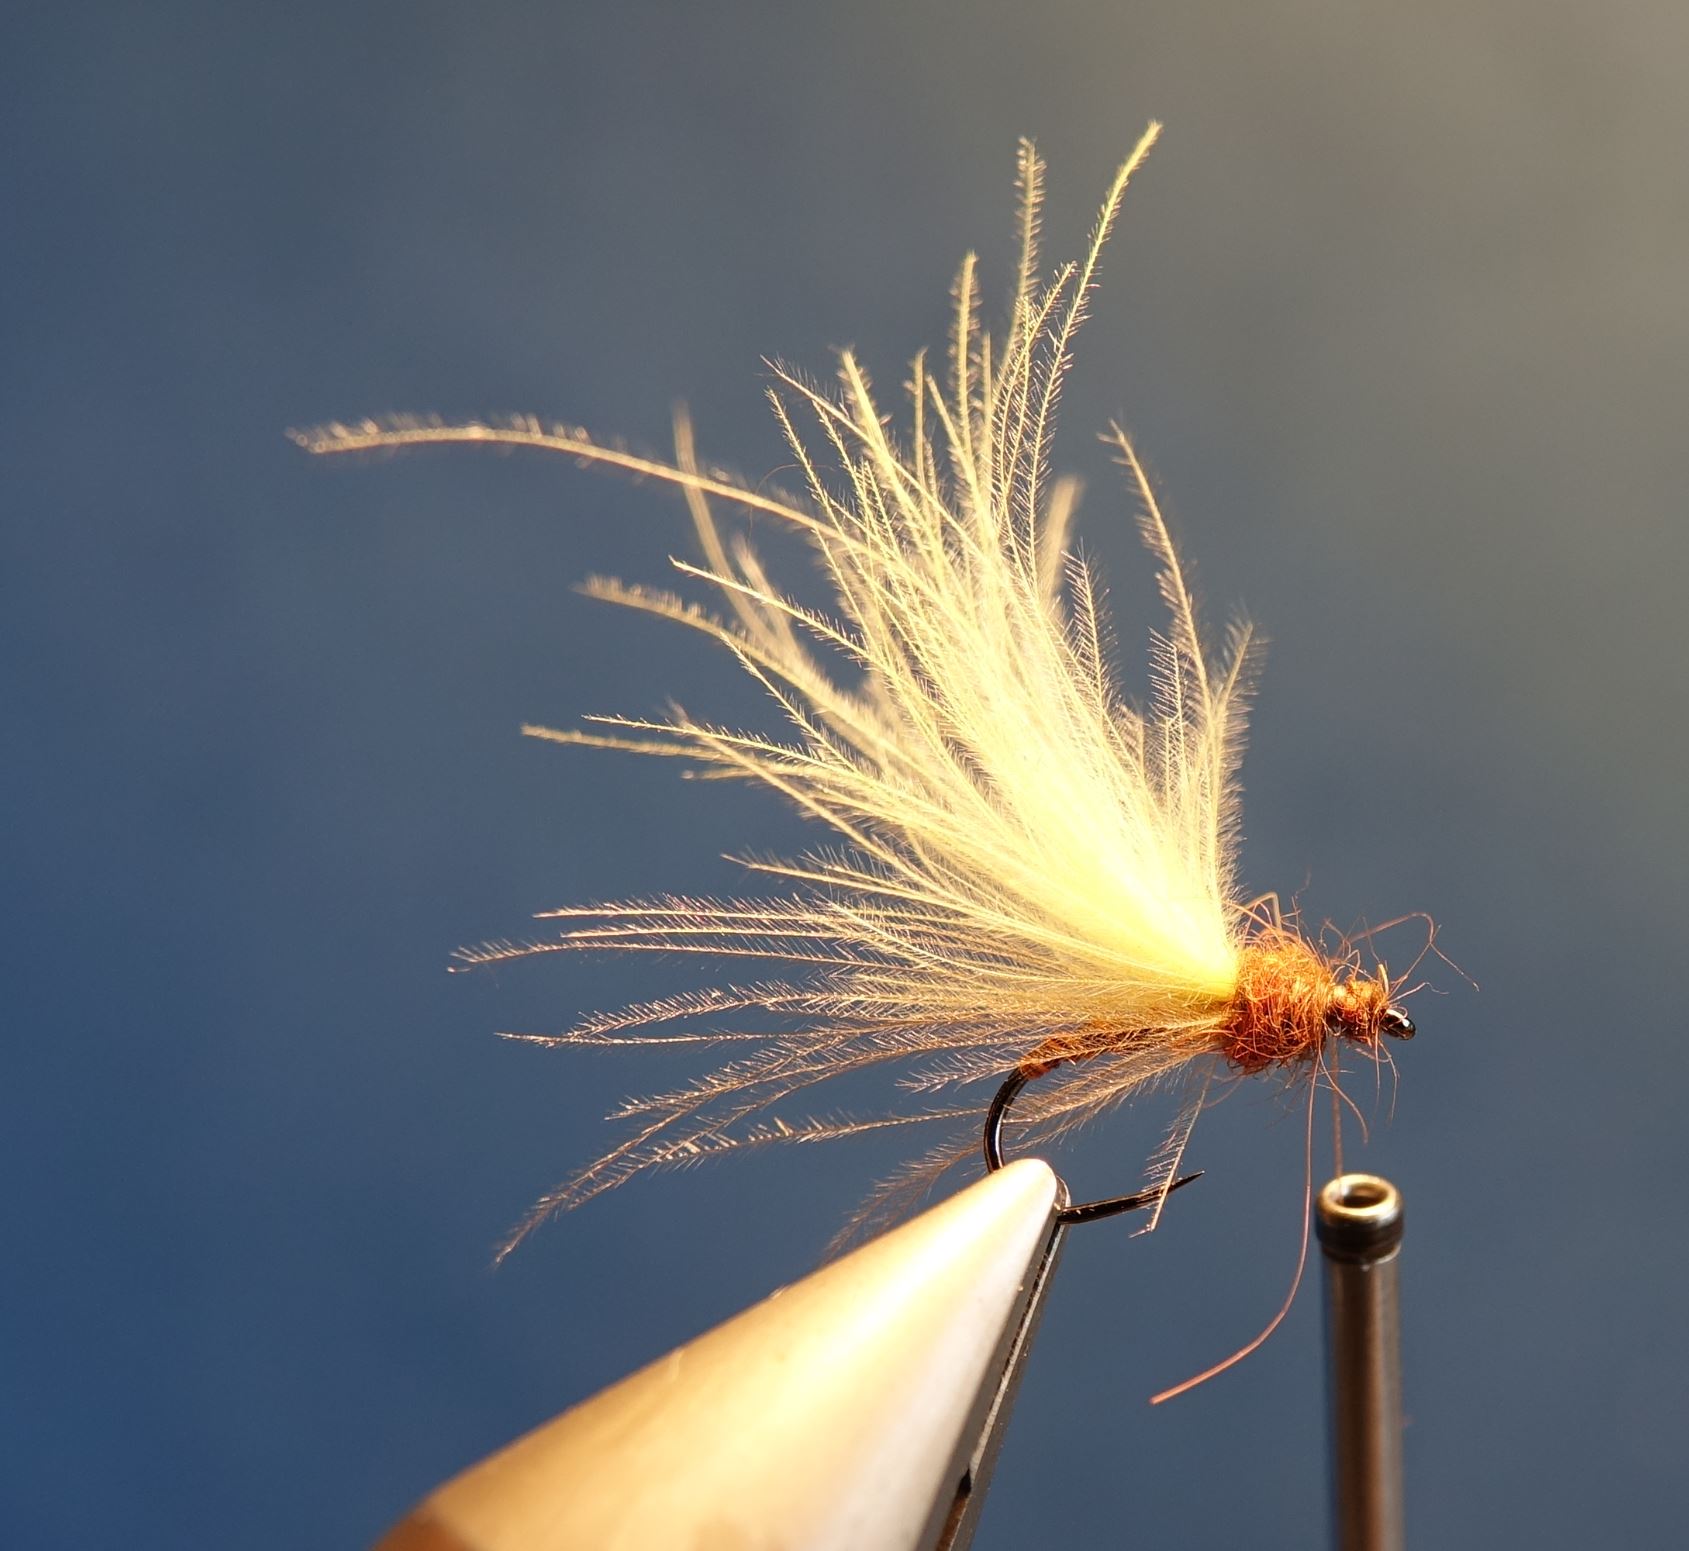 Sulfure emergente fly tying mouche eclosion